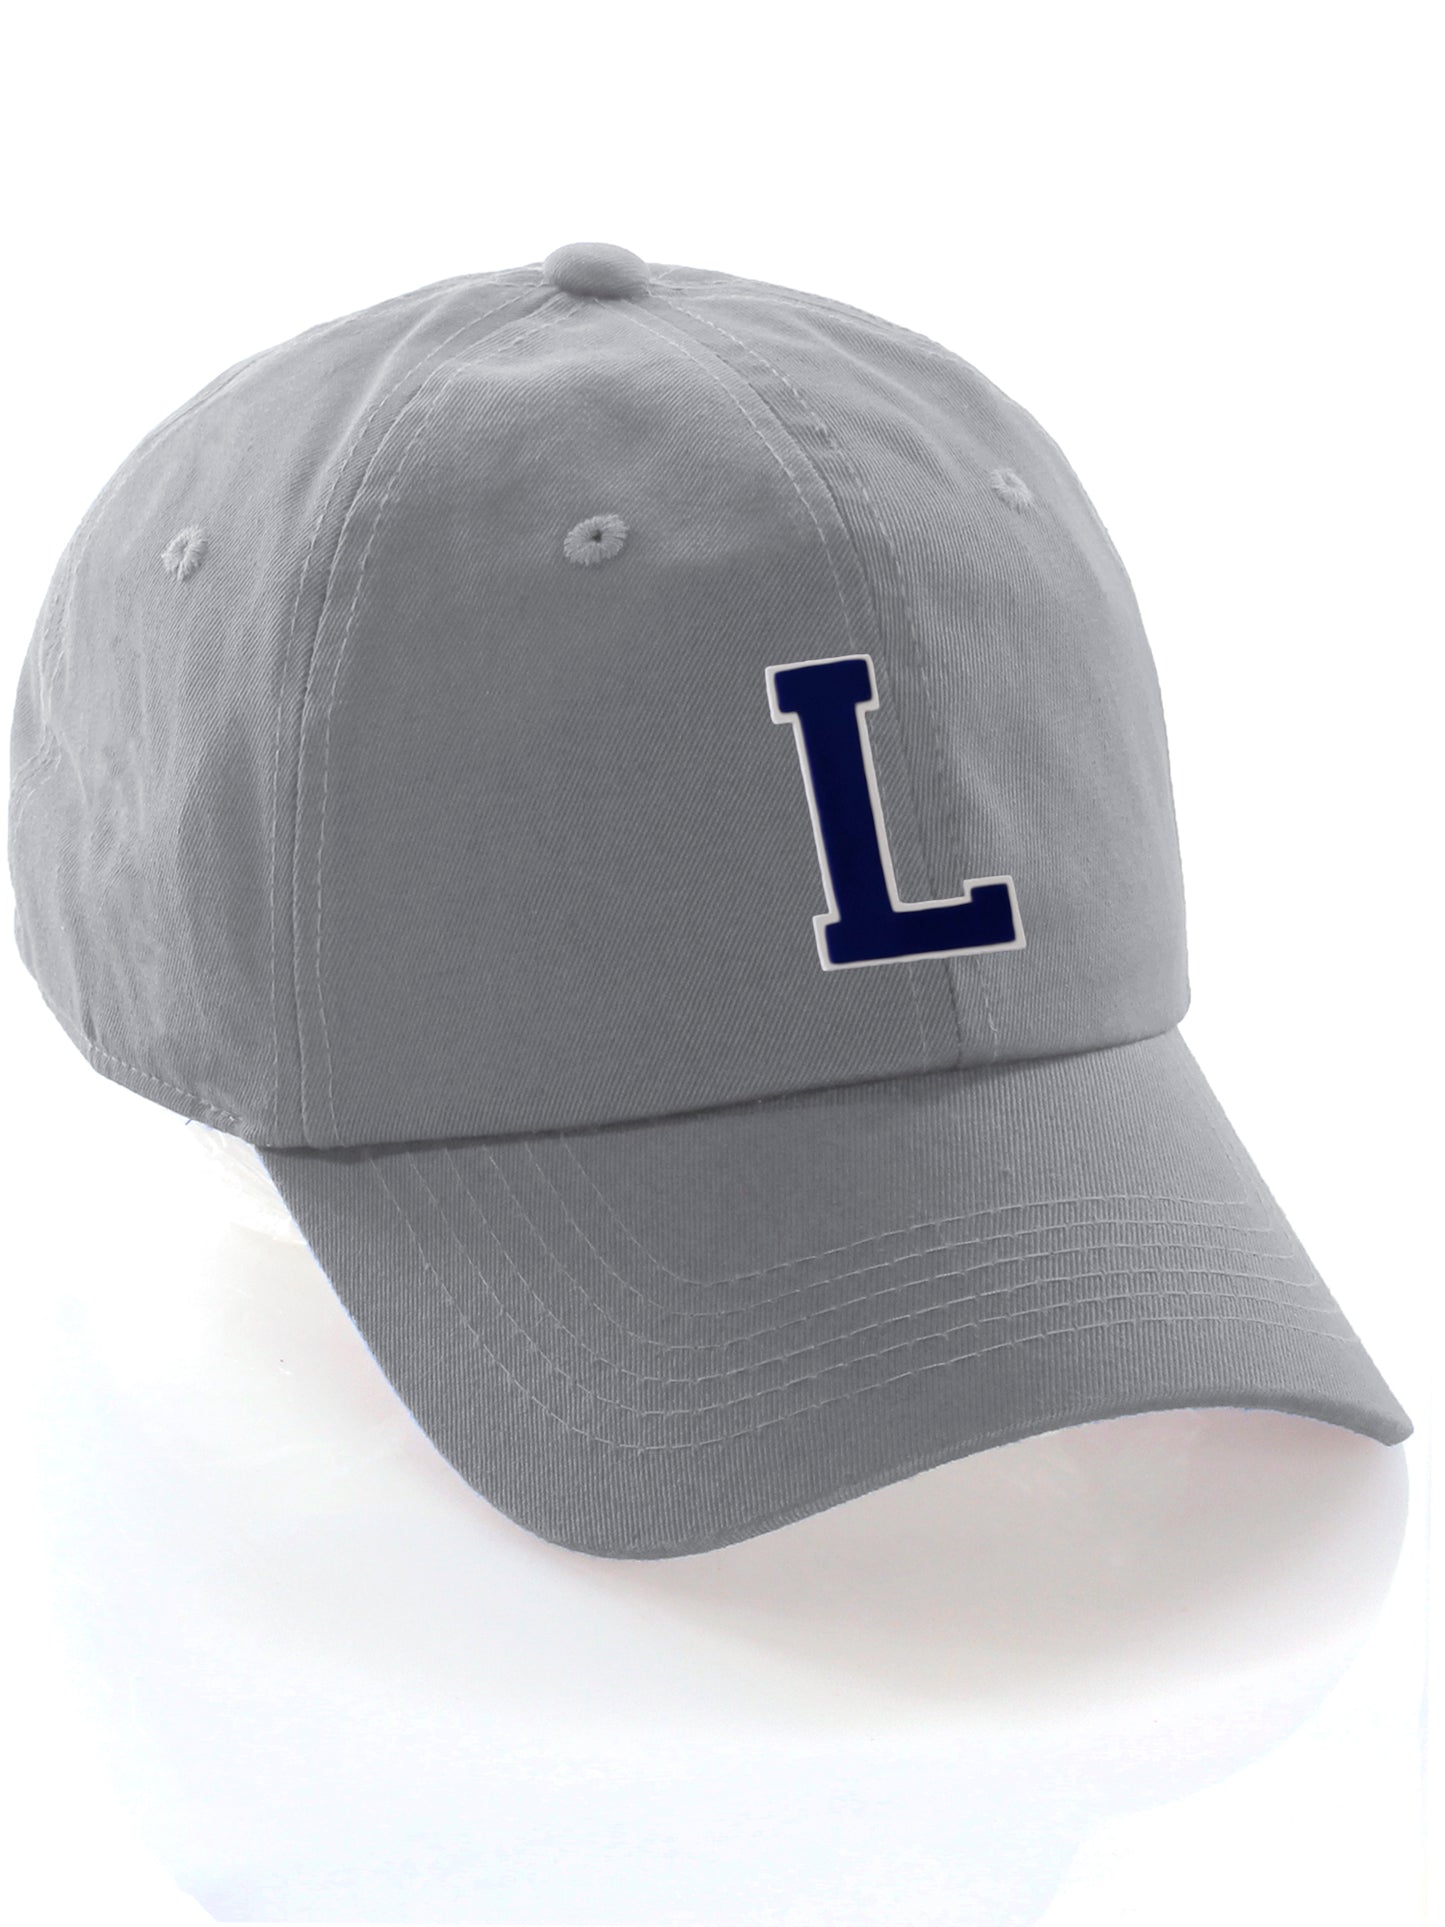 Custom Hat A to Z Initial Letters Classic Baseball Cap, Light Grey White Navy